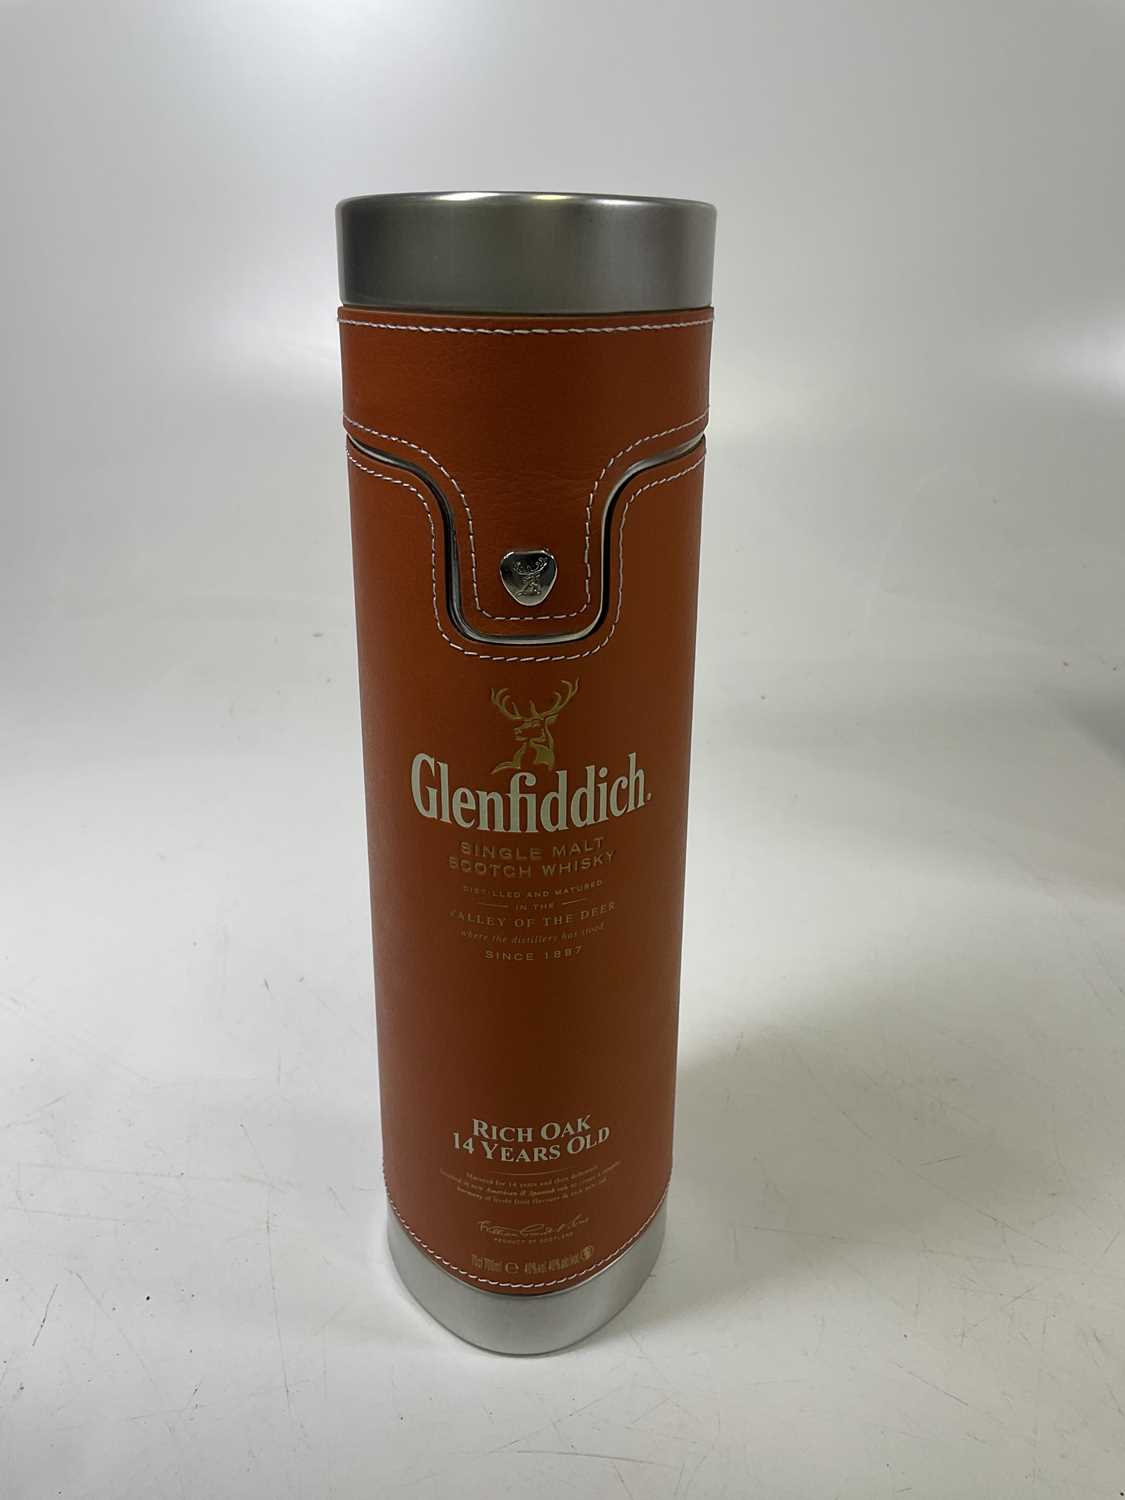 WHISKY; a bottle of Glenfiddich Single Malt Scotch whisky, Rich Oak, aged 14 years, 40%, 70cl, in - Image 3 of 3